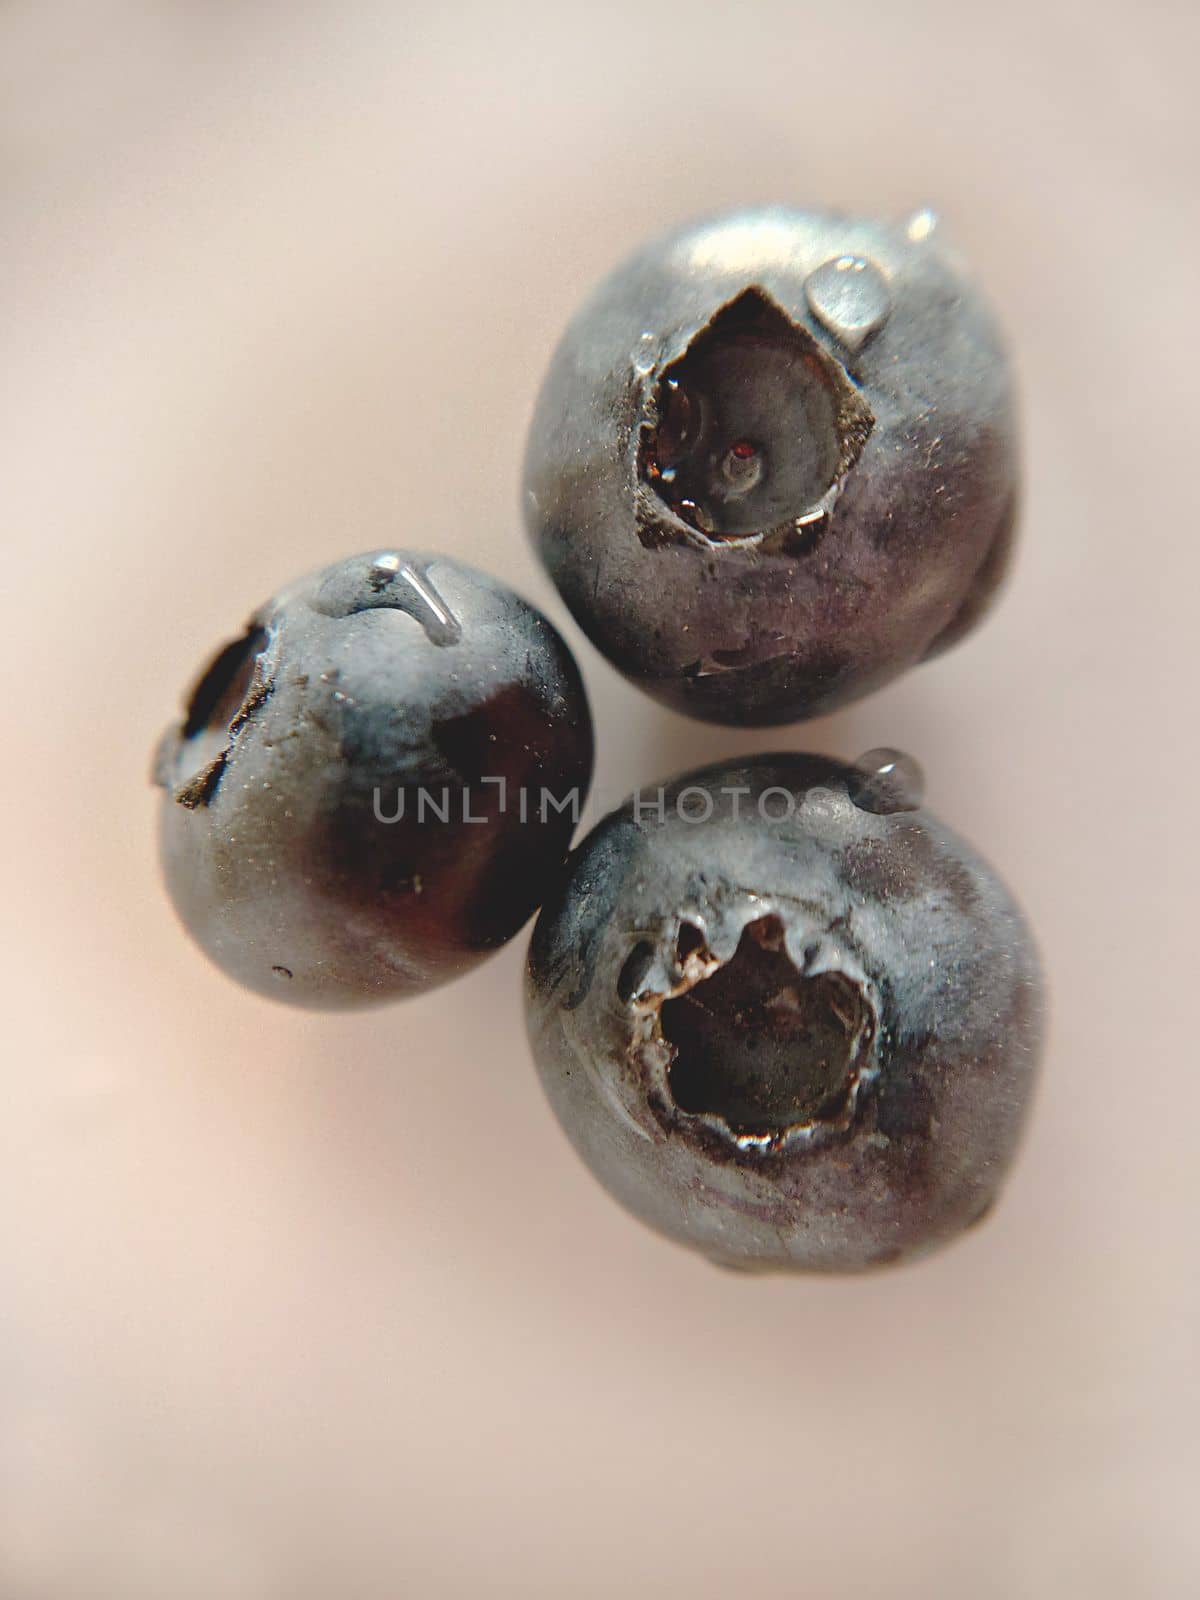 Three blueberries with water droplets close-up.Macro photography.Texture or background.Selective focus.